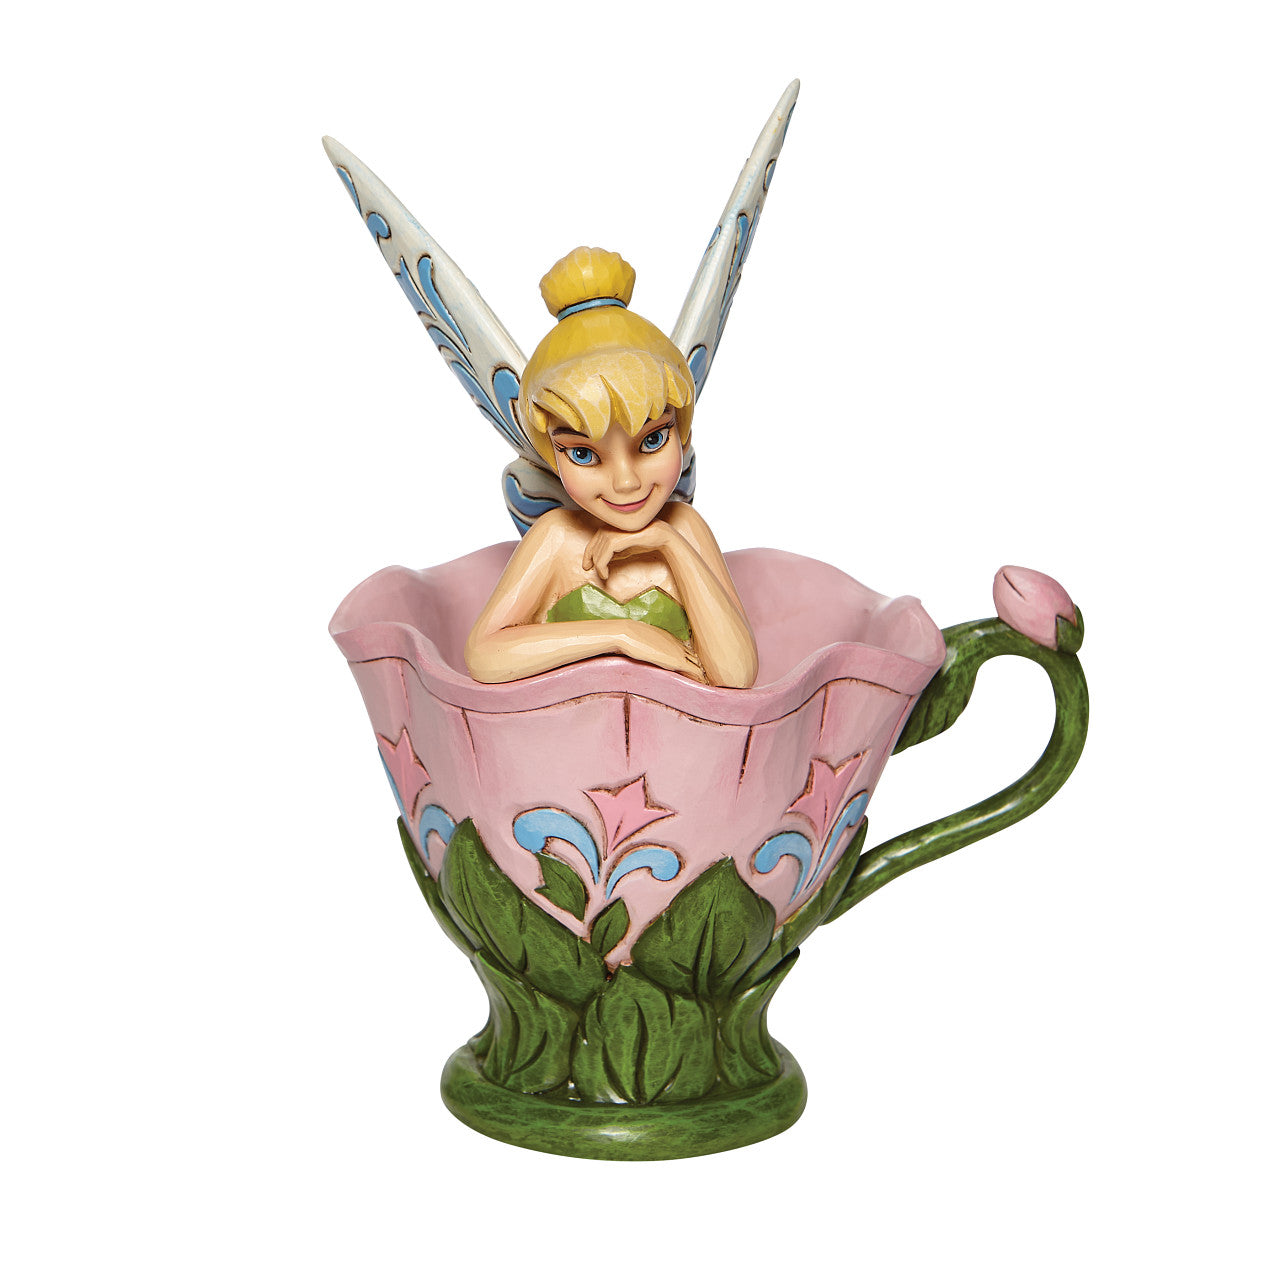 A Spot of Tink - Tinker Bell Sitting in a Flower